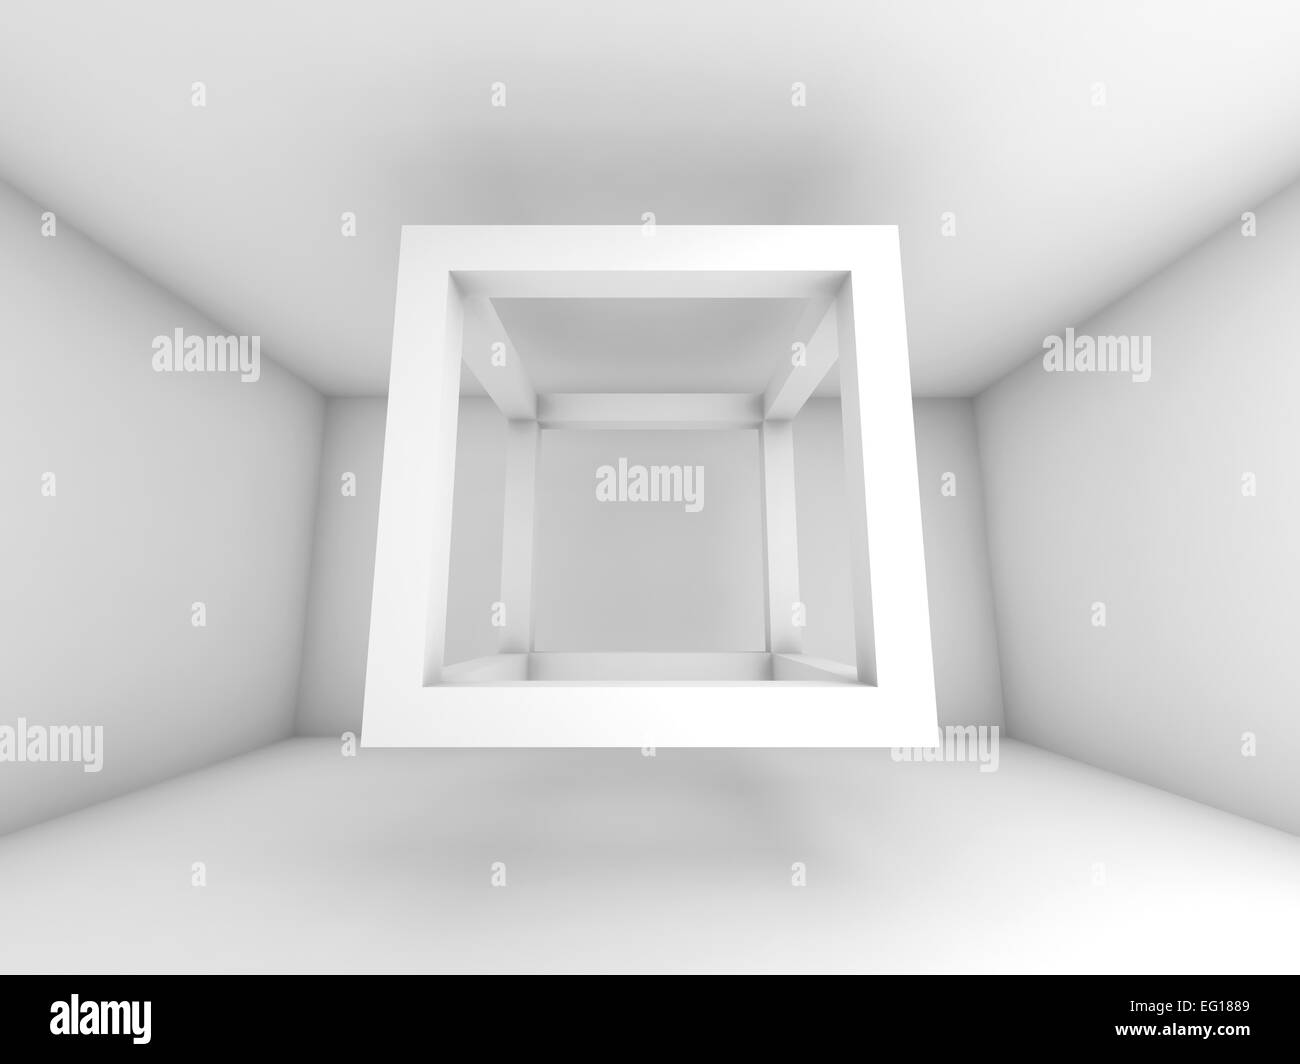 Abstract white room interior. 3d background illustration with flying empty beam cube structure Stock Photo